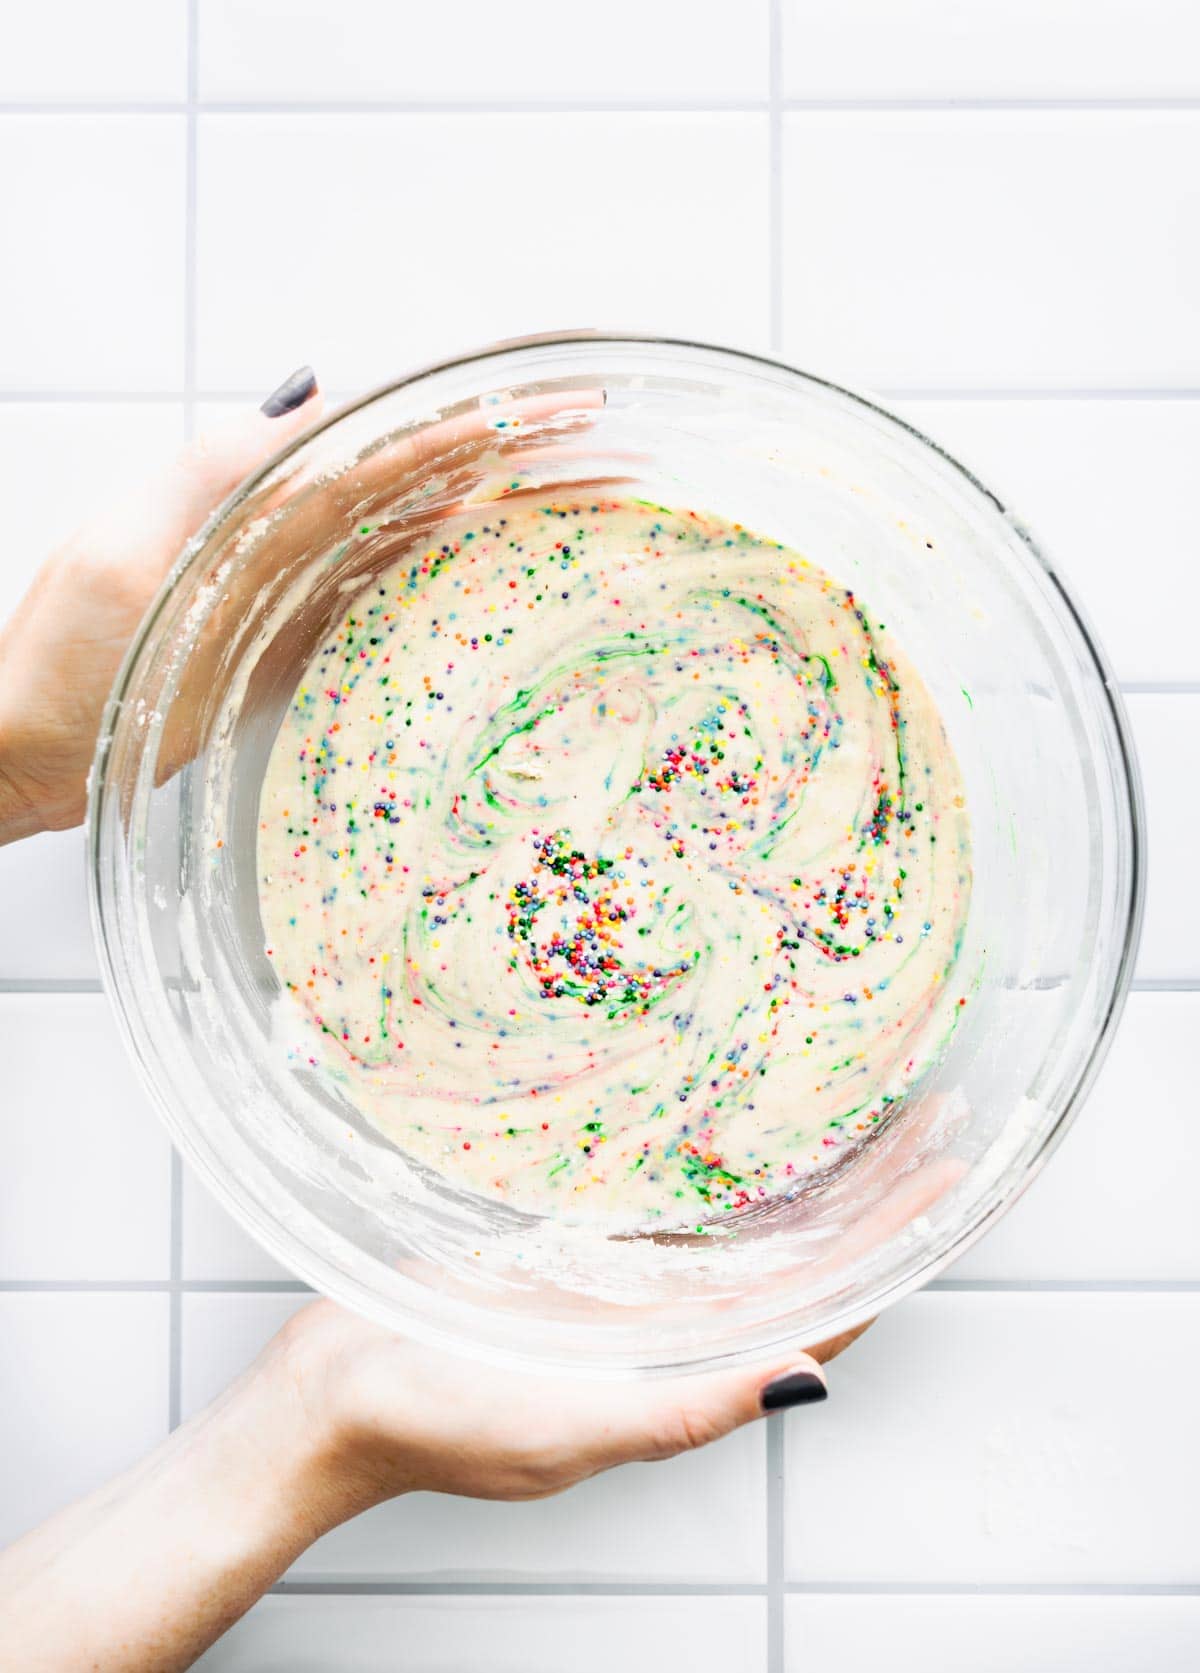 woman's hands holding glass mixing bowl full of batter with colored sprinkles